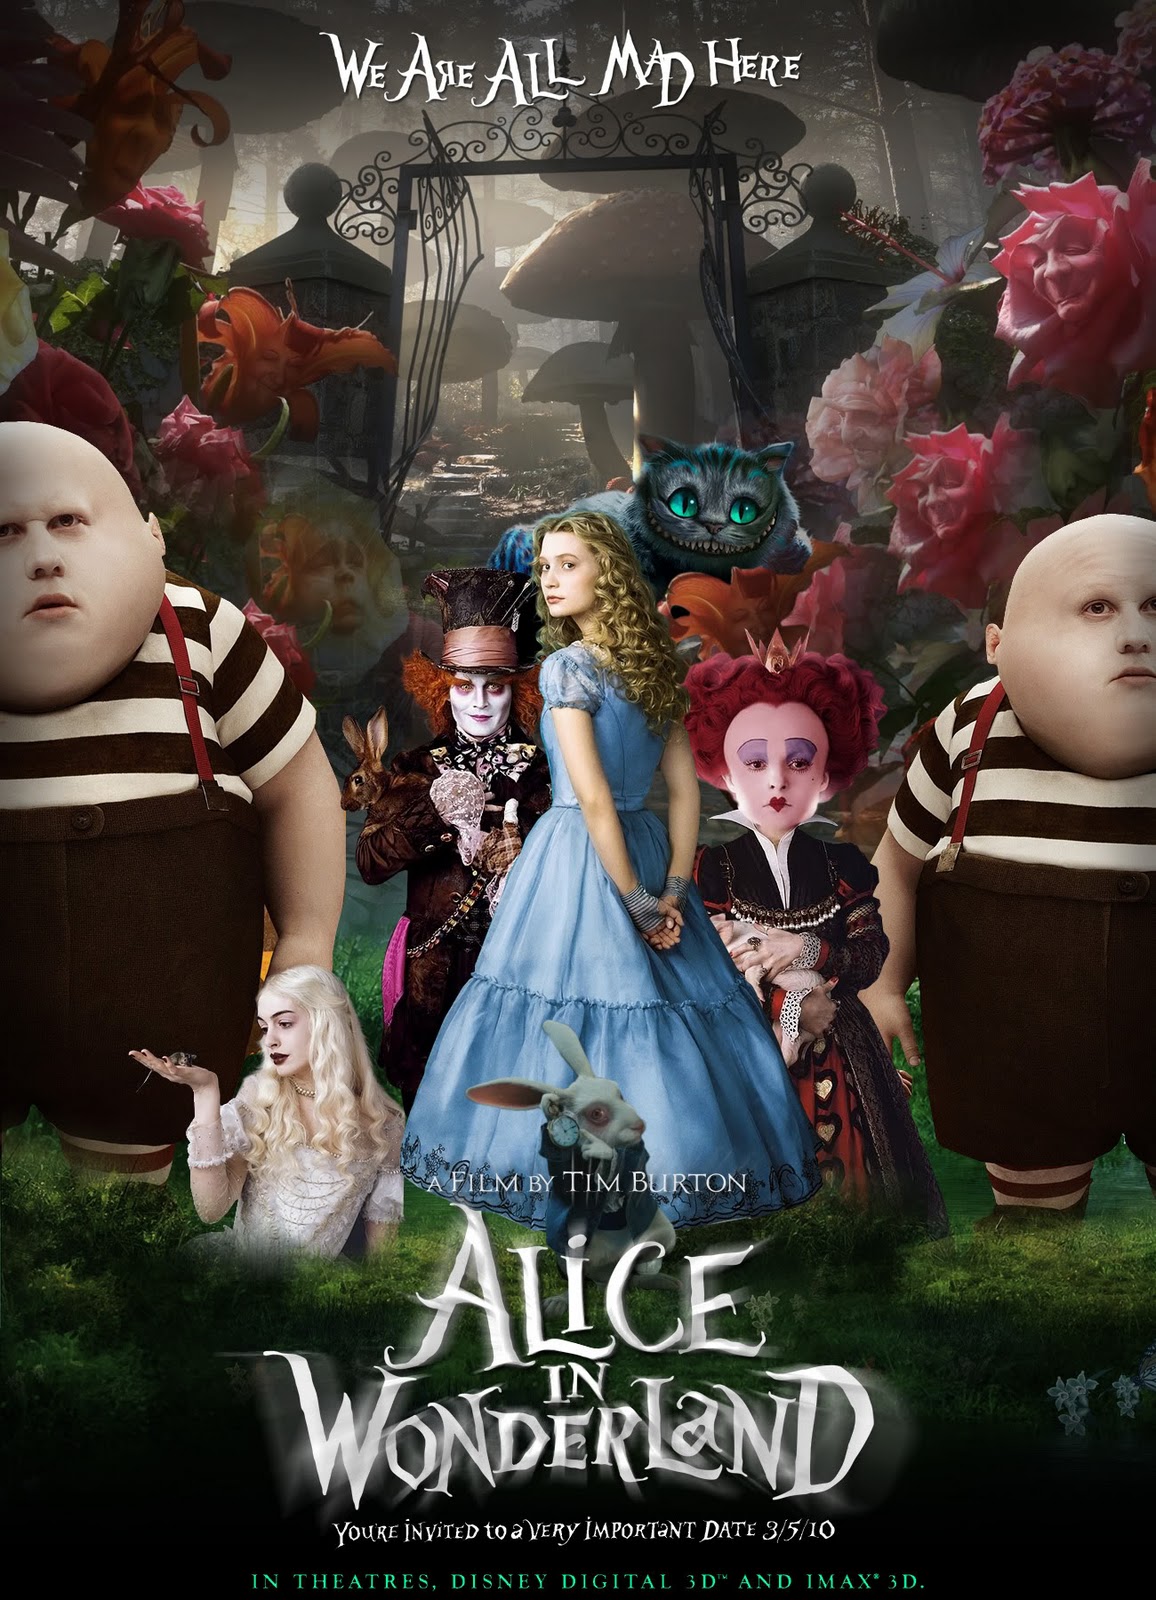 G324-A2 Coursework: Film Poster Analysis - Alice in Wonderland (2010)